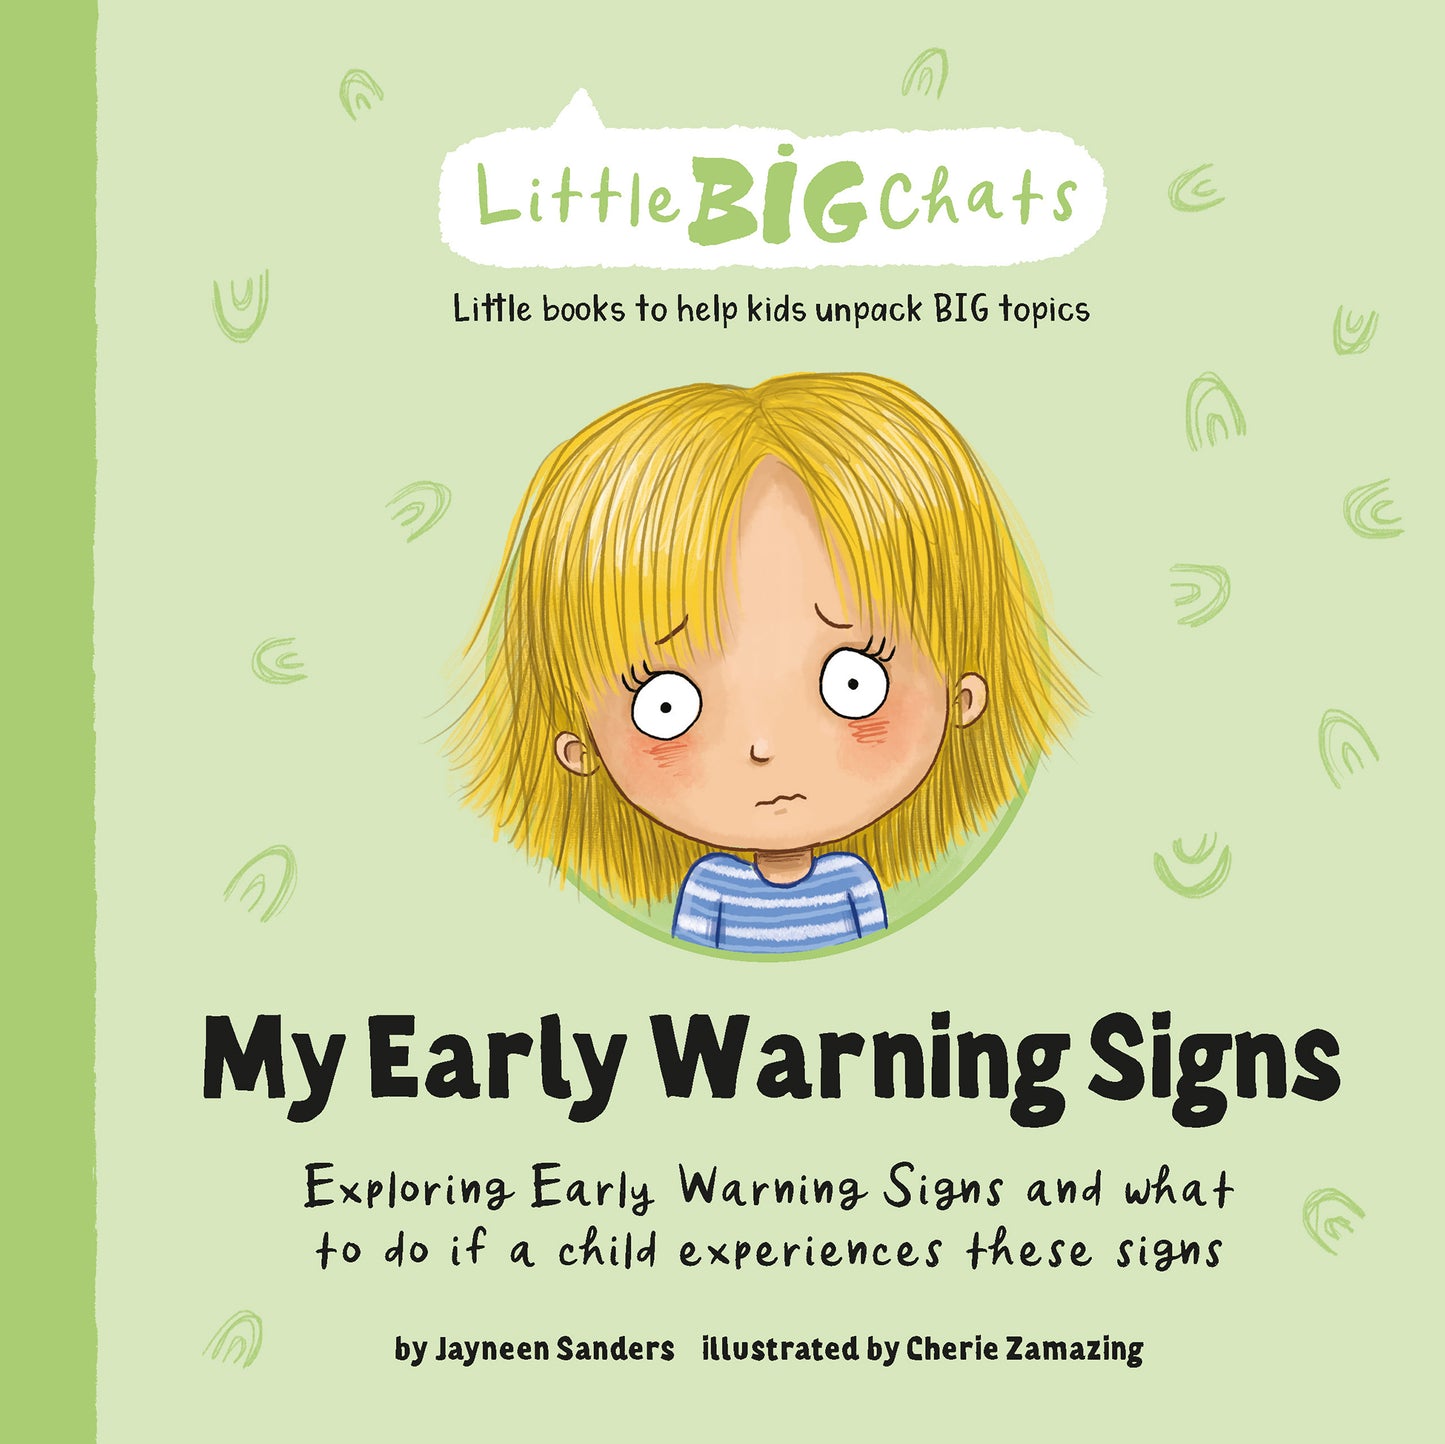 The cover of the Little BIG Chats book ‘My Early Warning Signs’ by Jayneen Sanders.